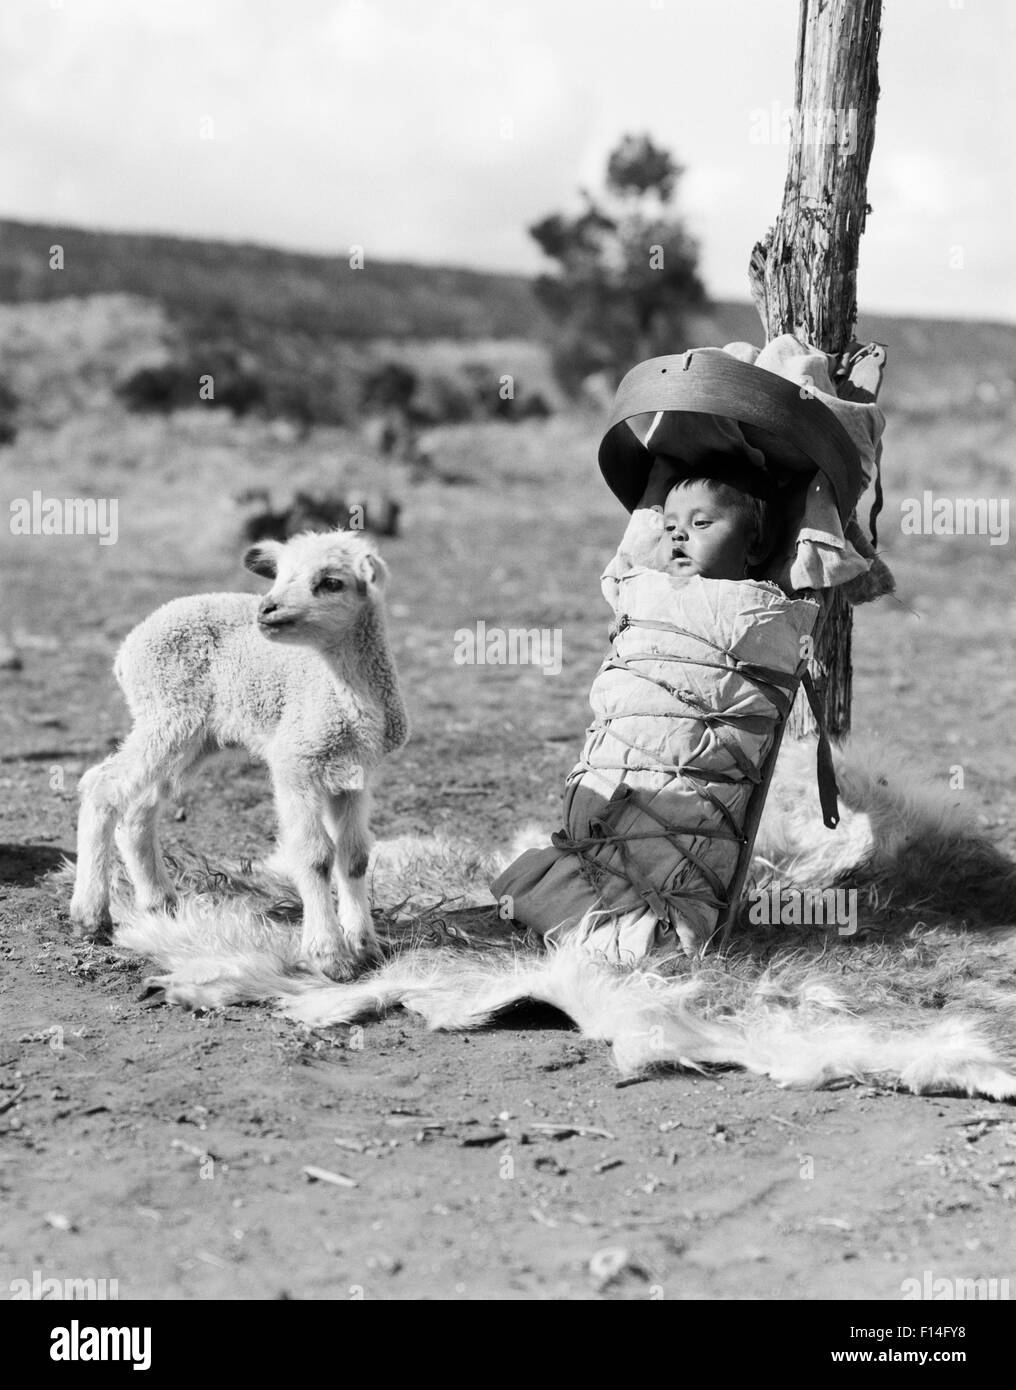 1930s NATIVE AMERICAN NAVAJO BABY PAPOOSE ON SQUAW CRADLE BOARD AND LAMB Stock Photo